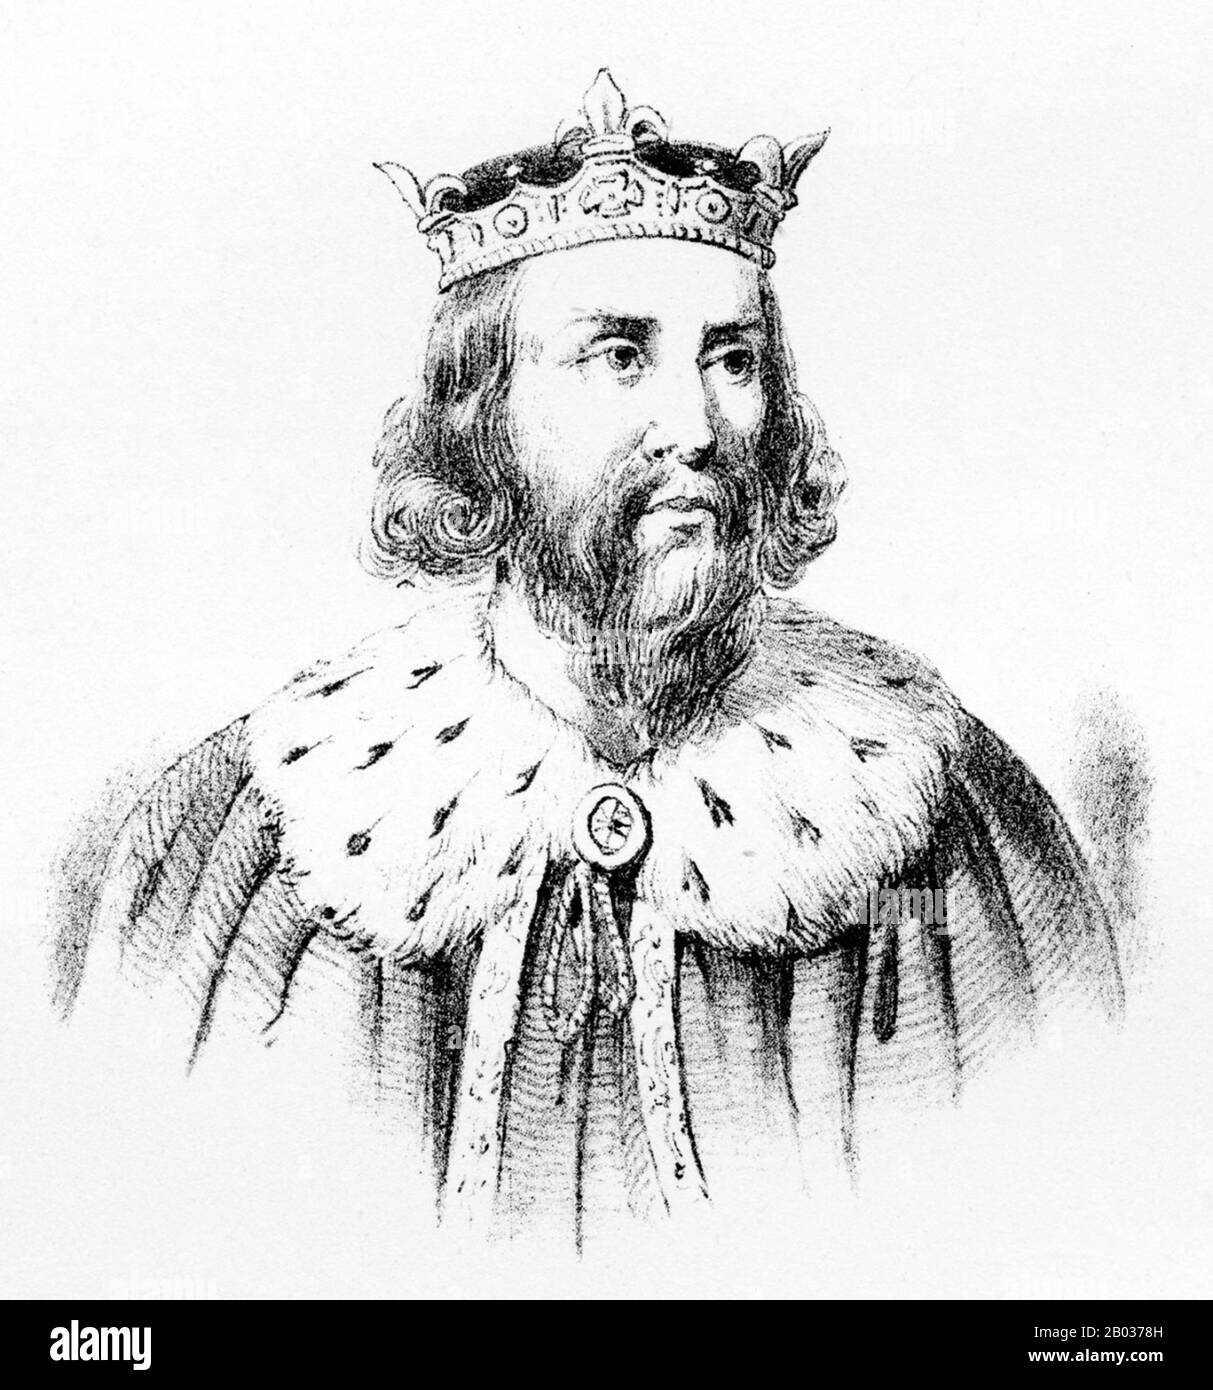 Alfred the Great (849 – 26 October 899), was King of Wessex from 871 to 899.  Alfred successfully defended his kingdom against the Viking attempt at conquest, and by the time of his death had become the dominant ruler in England. He is one of only two English monarchs to be given the epithet 'the Great', the other being the Scandinavian Cnut the Great. He was also the first King of the West Saxons to style himself 'King of the Anglo-Saxons'. Details of Alfred's life are described in a work by the 10th-century Welsh scholar and bishop Asser. Stock Photo